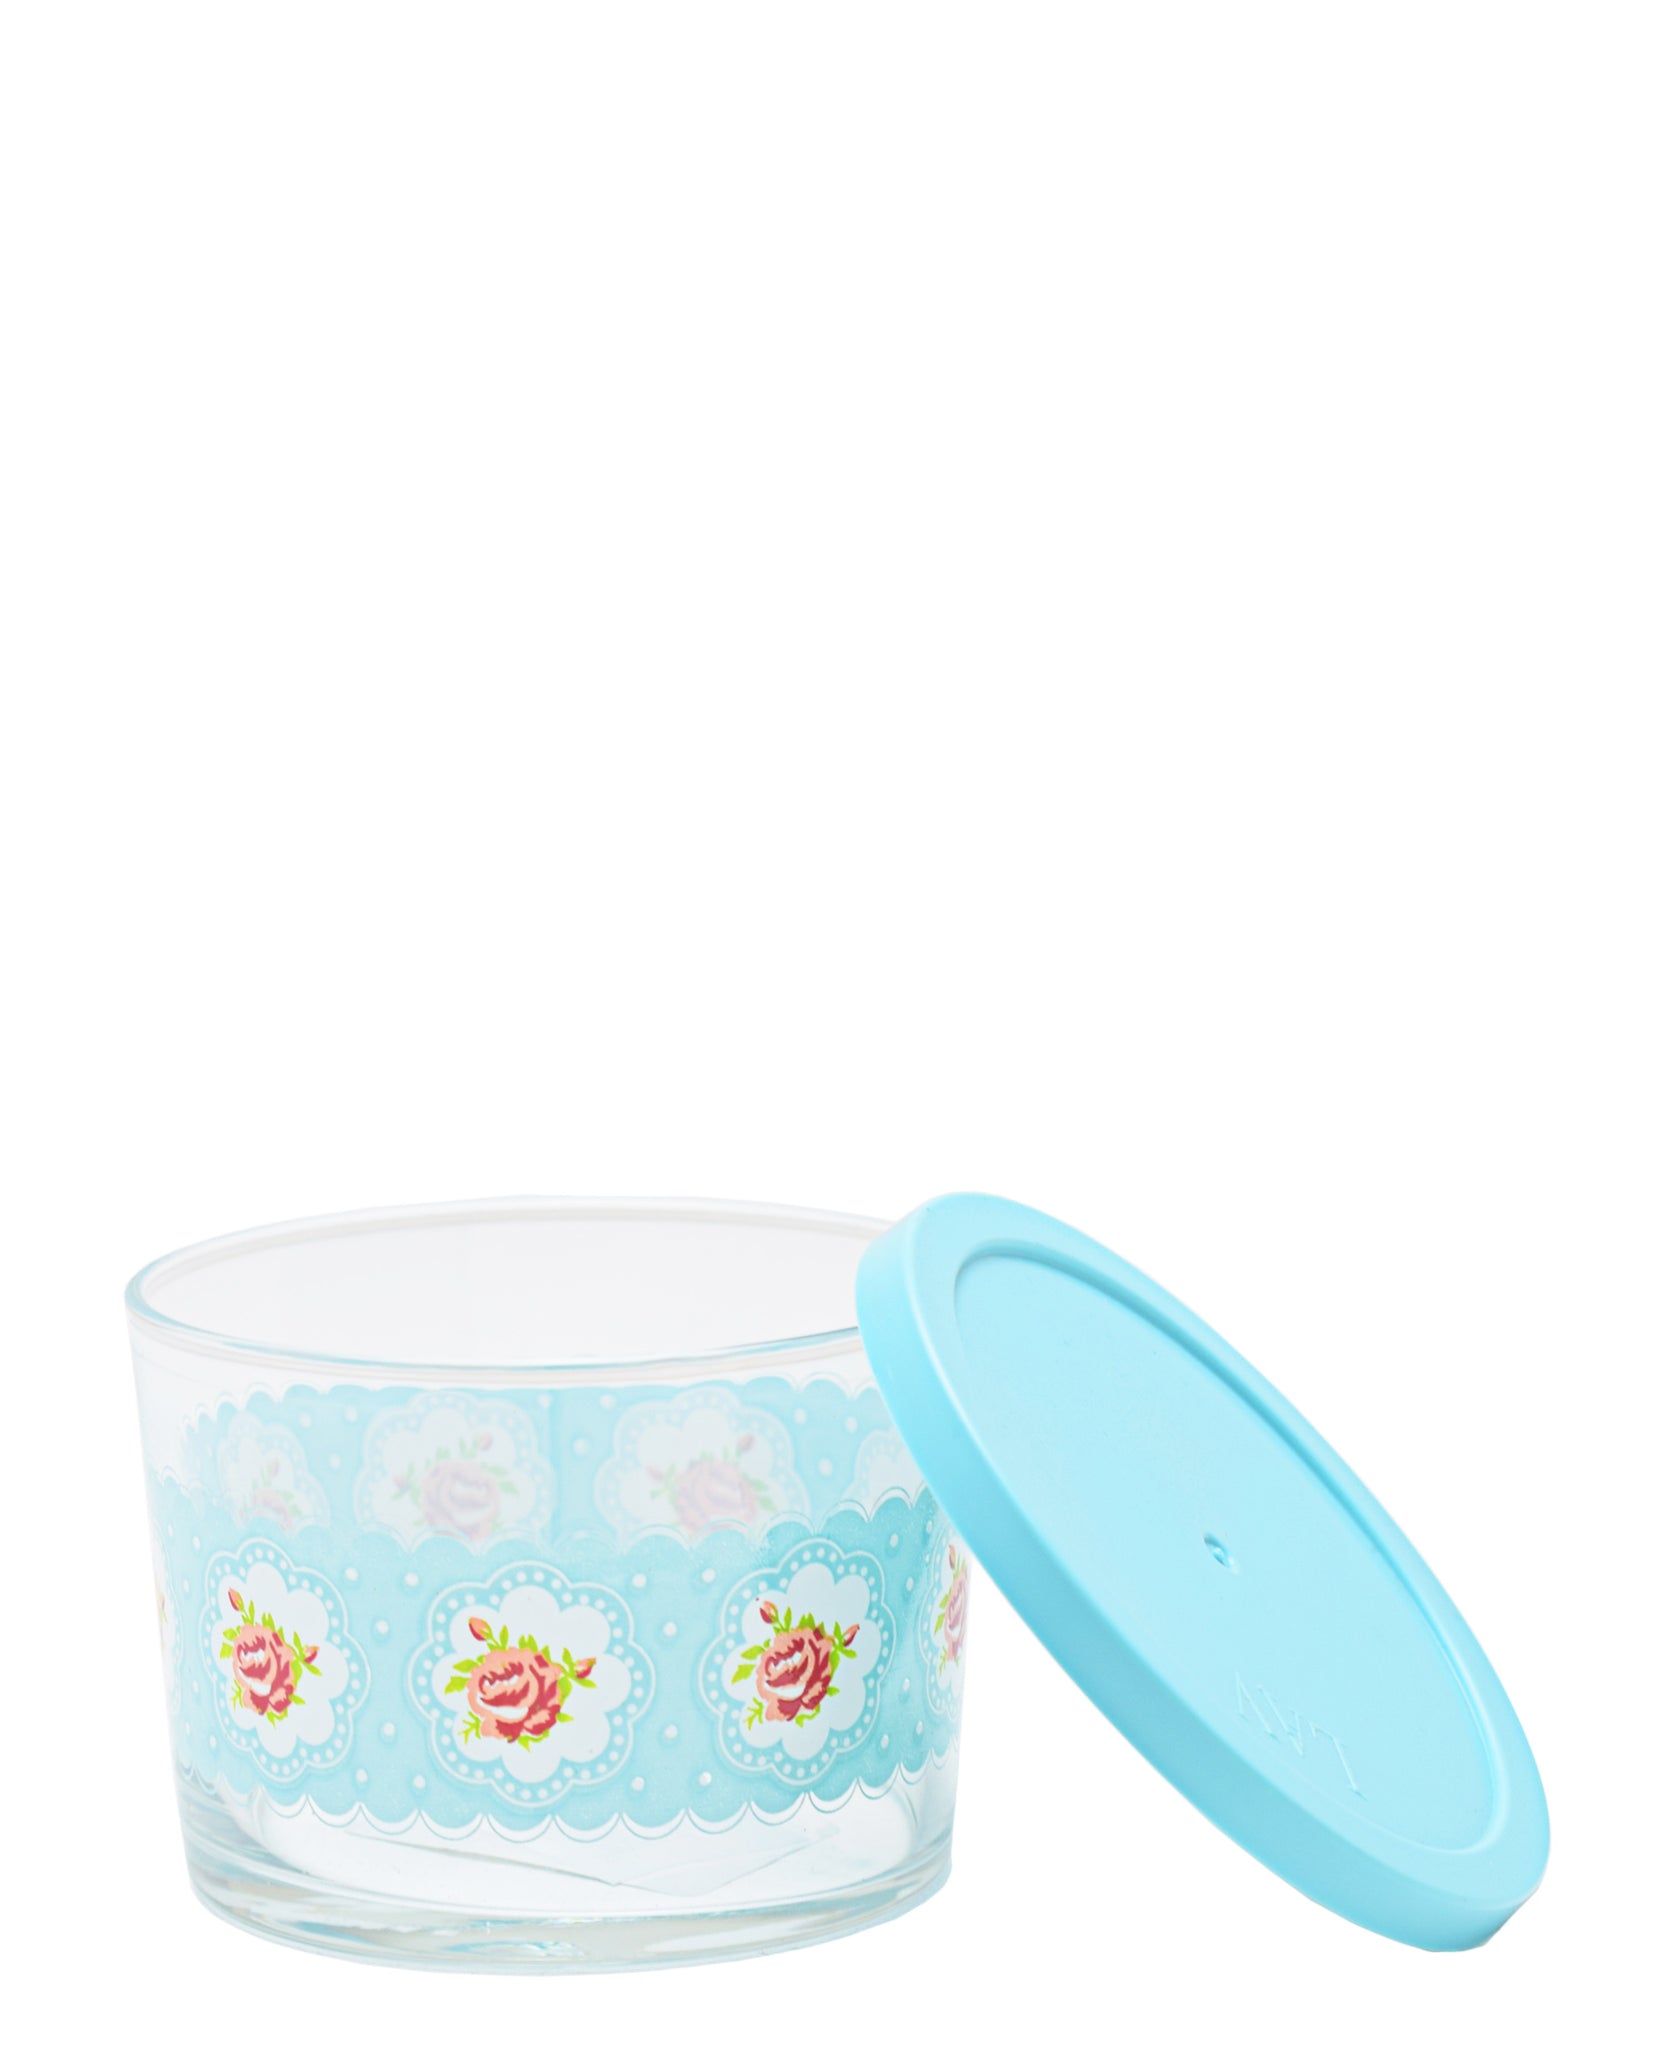 LAV 240ml Bowl With Lid - Blue